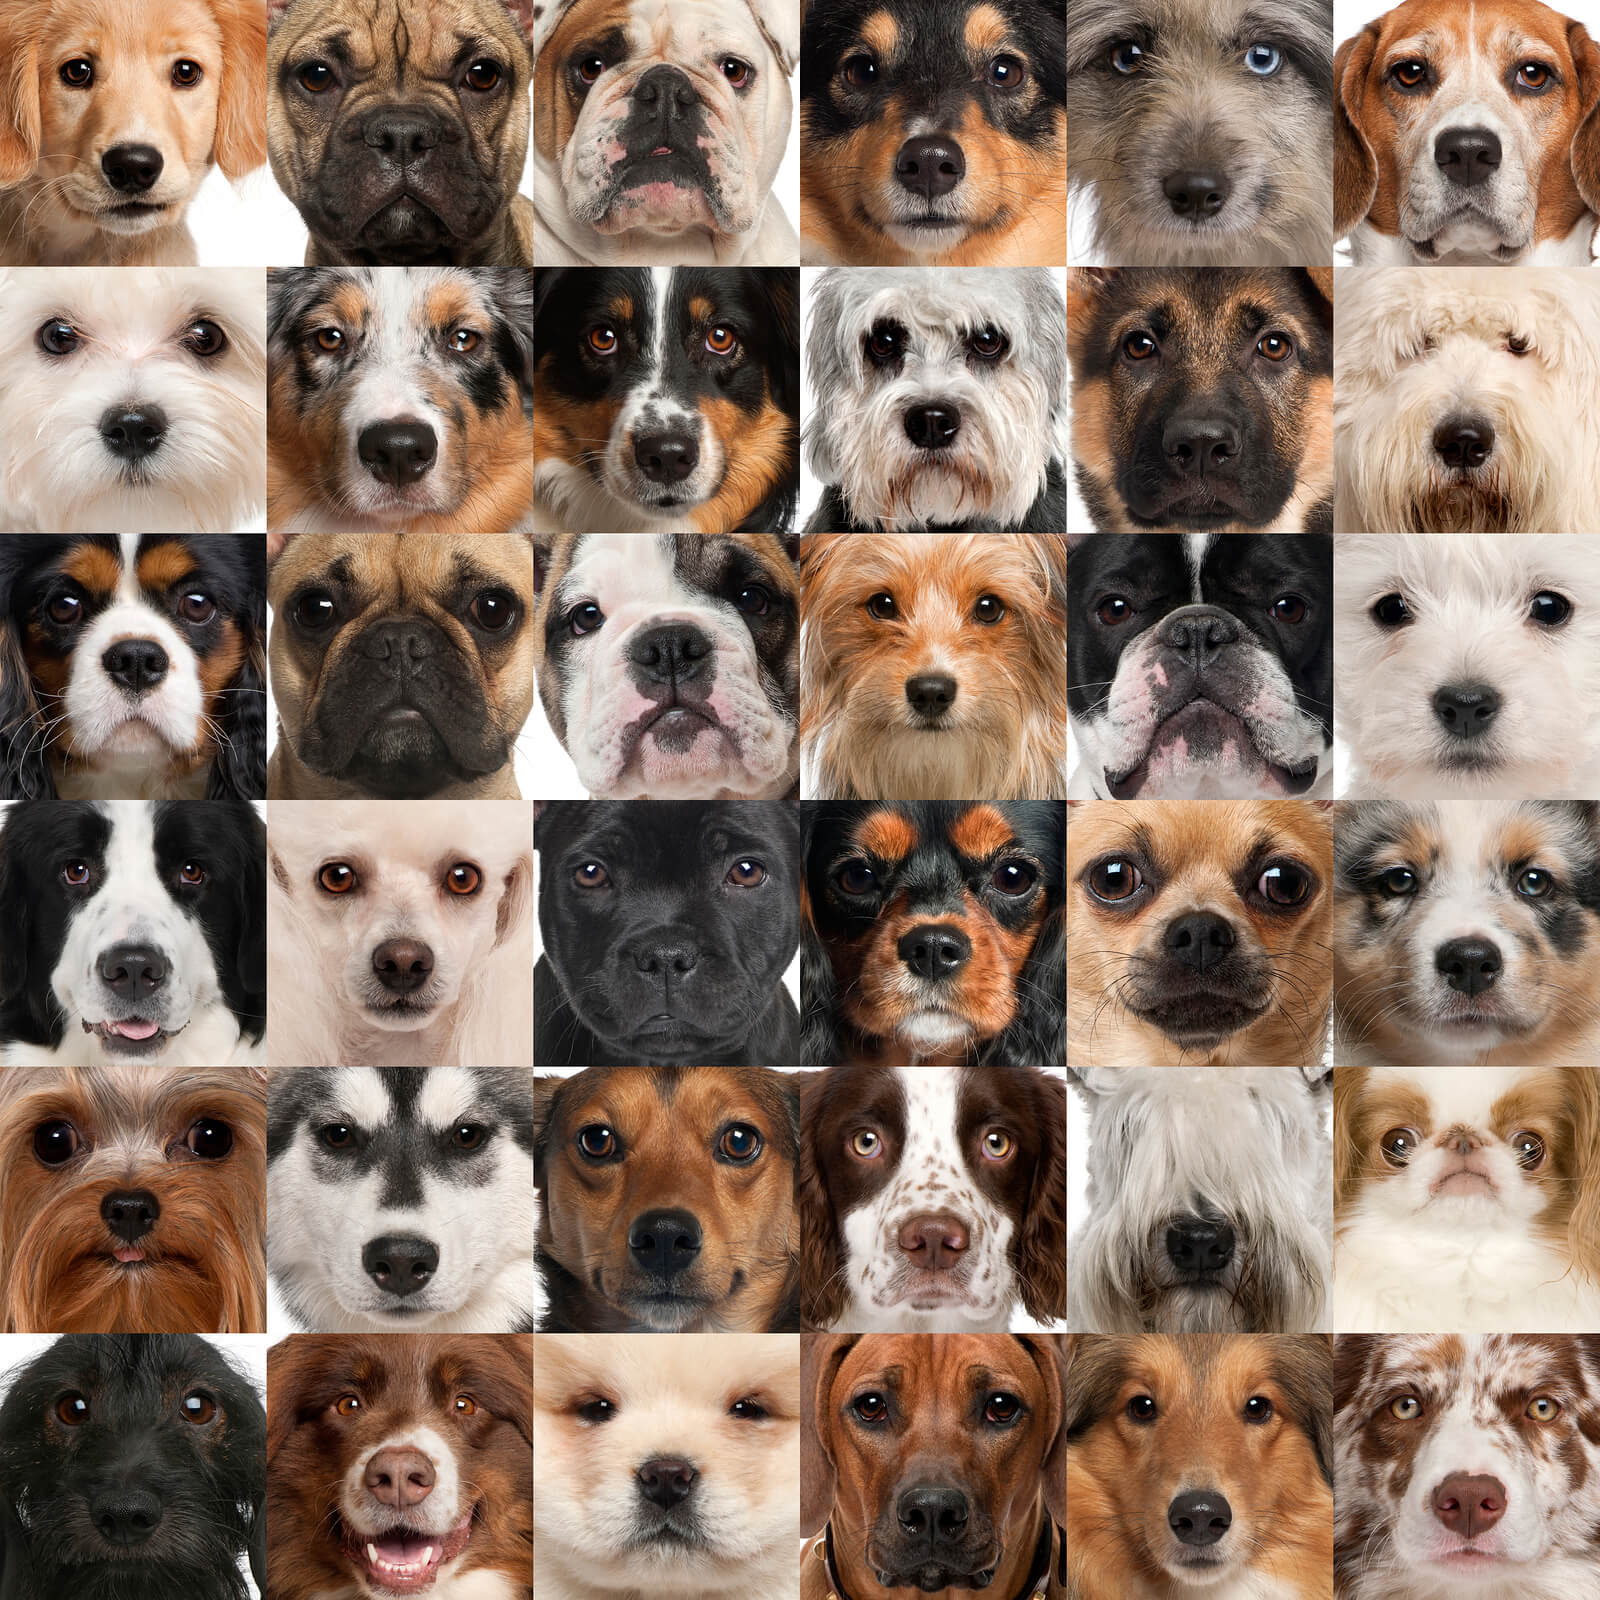 faces of dogs from several breeds